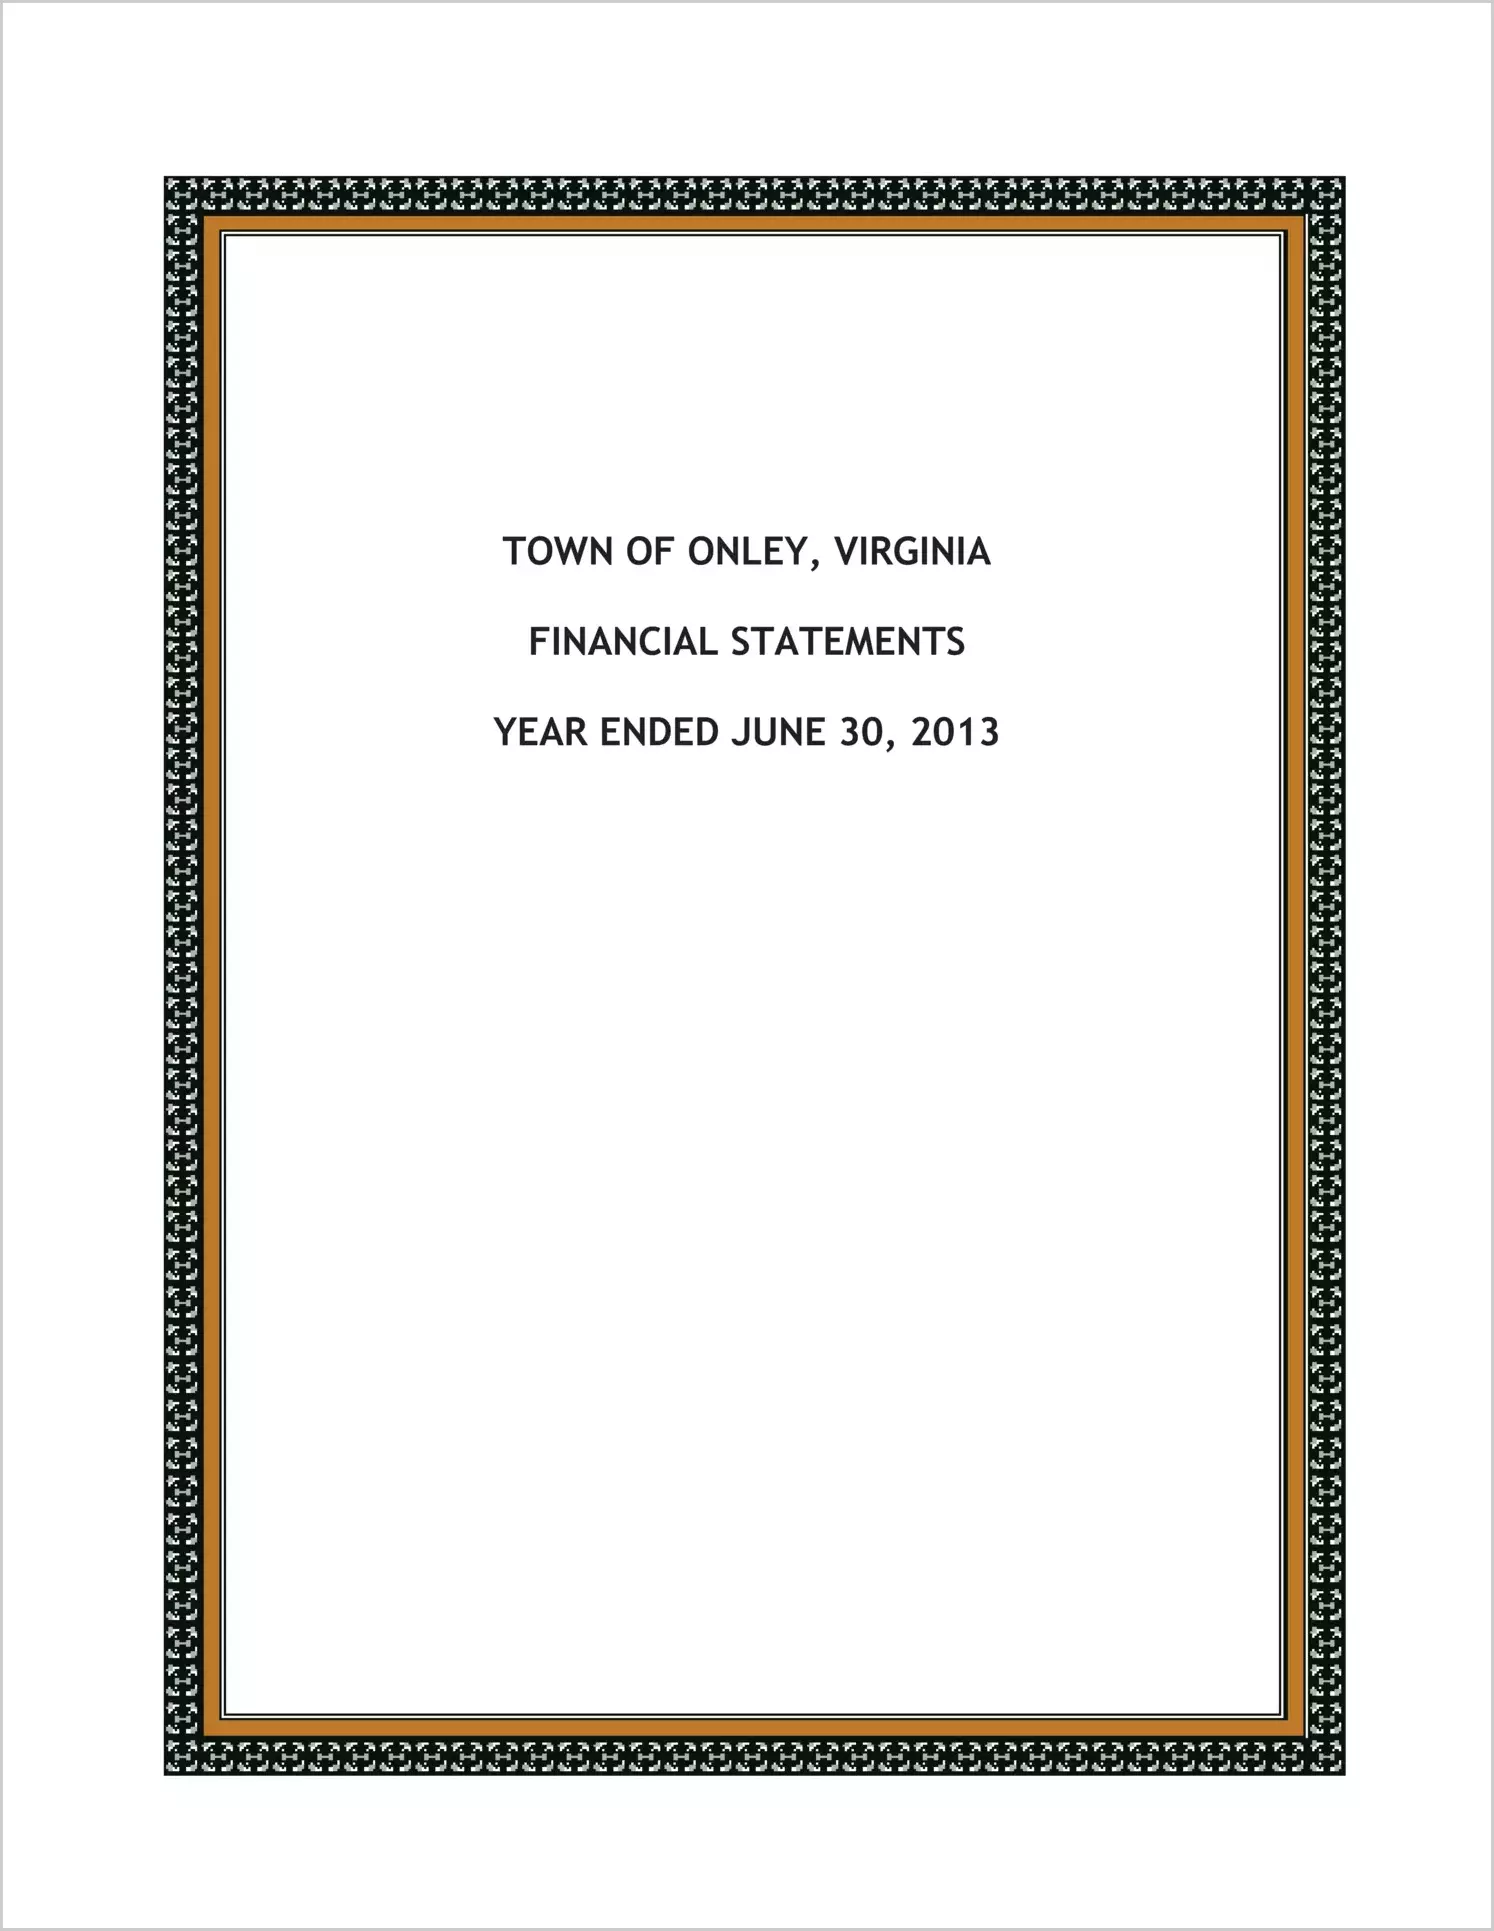 2013 Annual Financial Report for Town of Onley